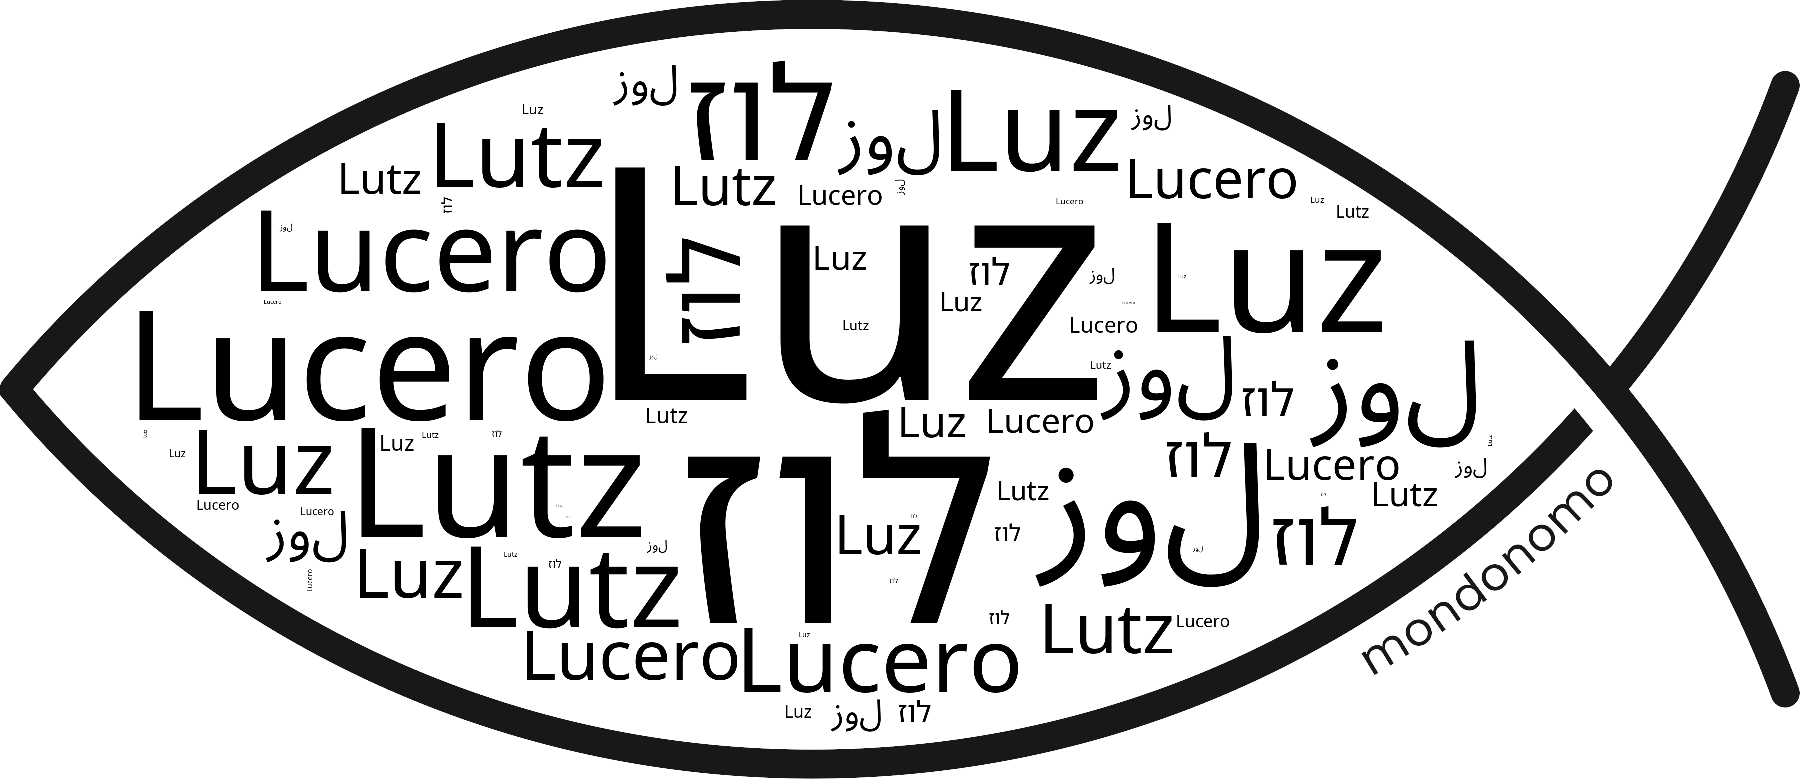 Name Luz in the world's Bibles